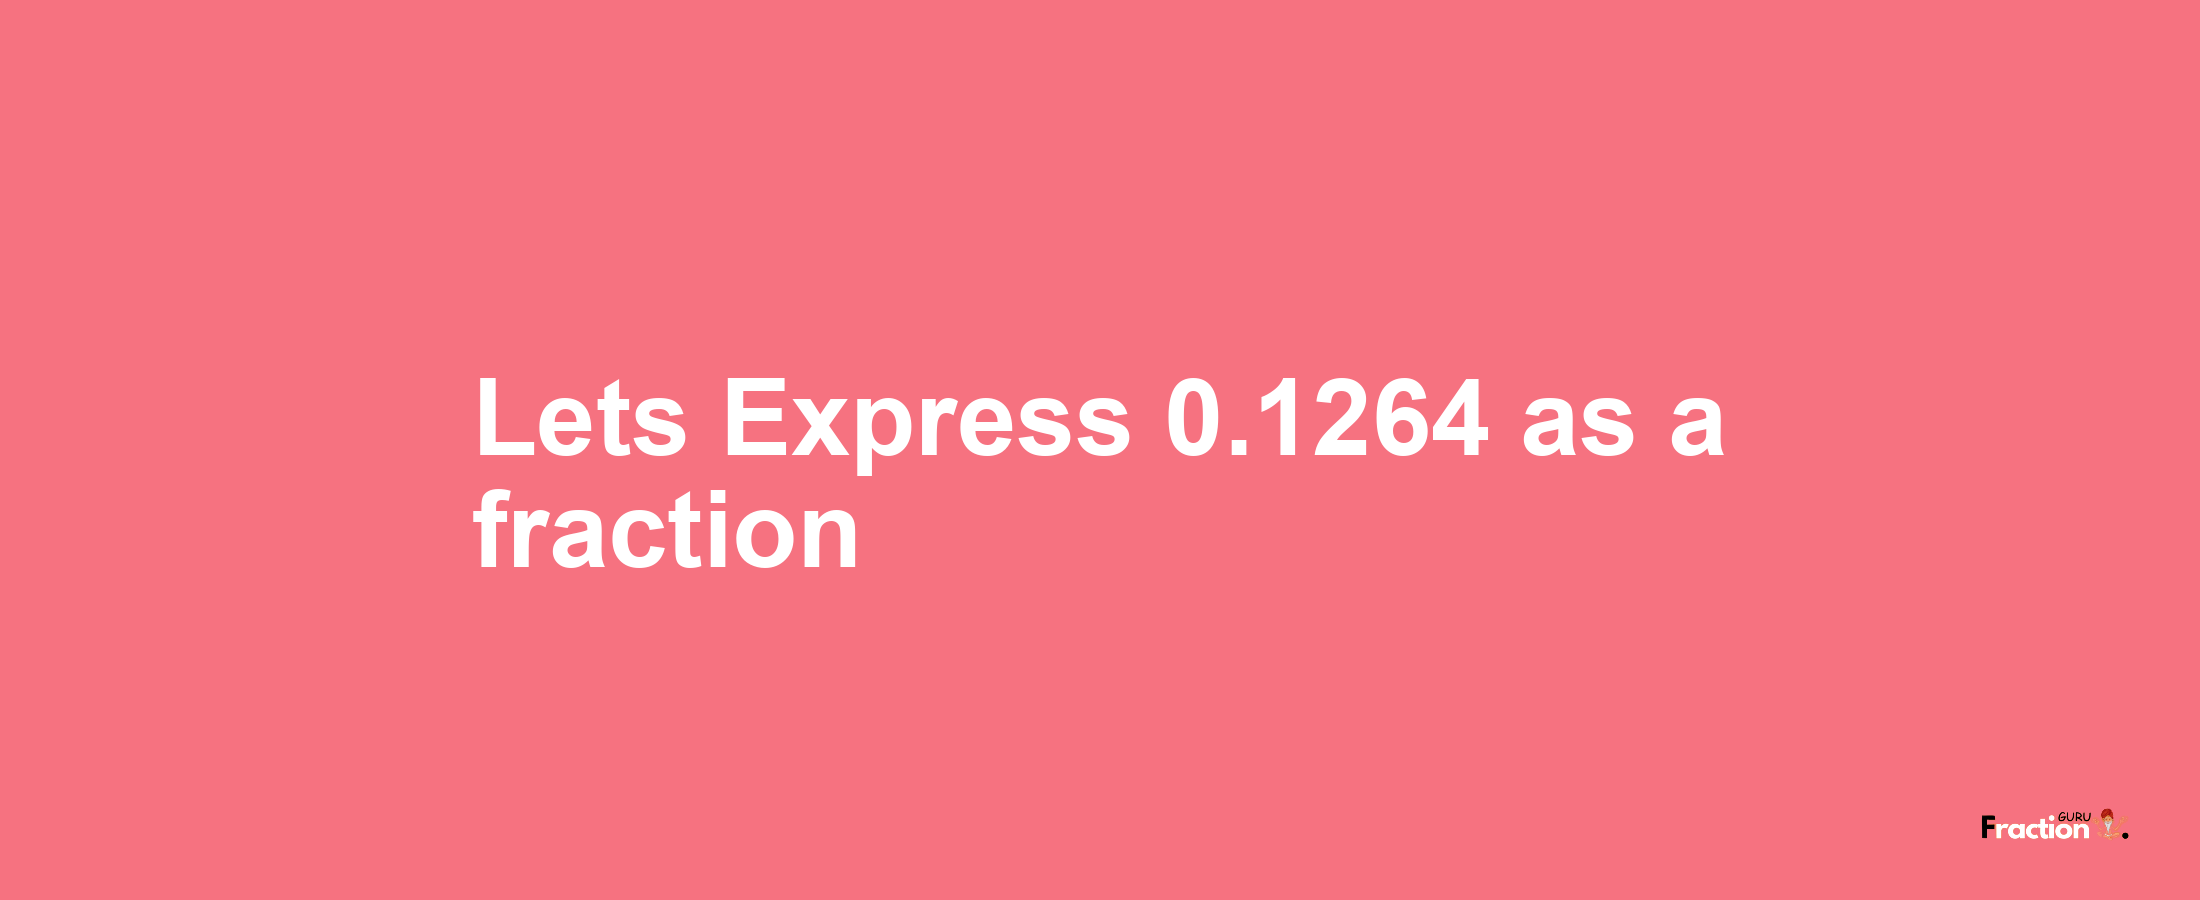 Lets Express 0.1264 as afraction